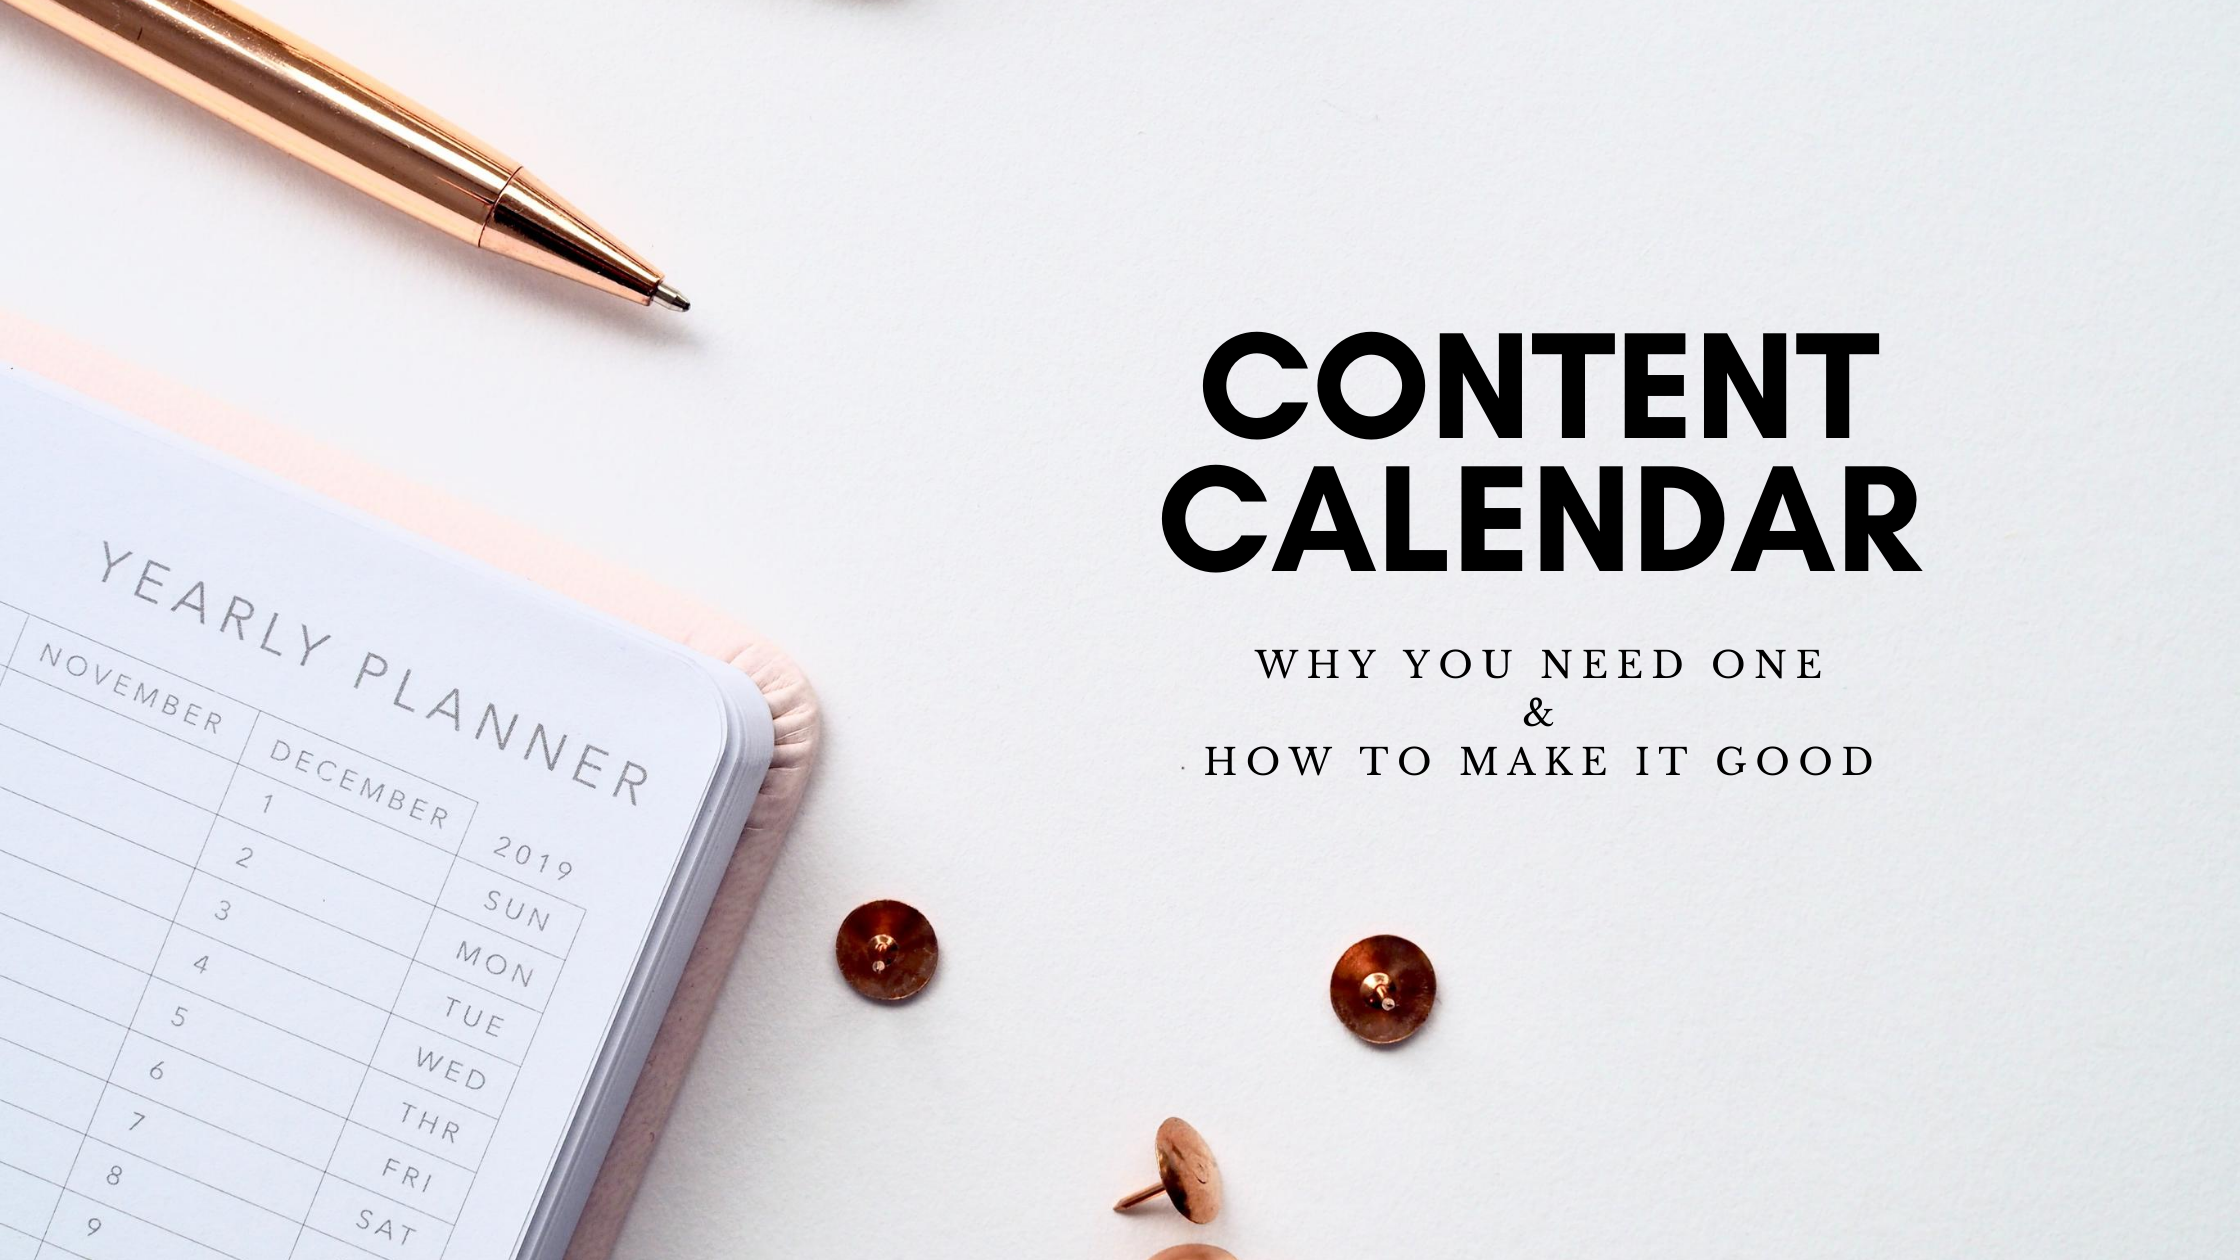 What is a content calendar & how to make a good one?